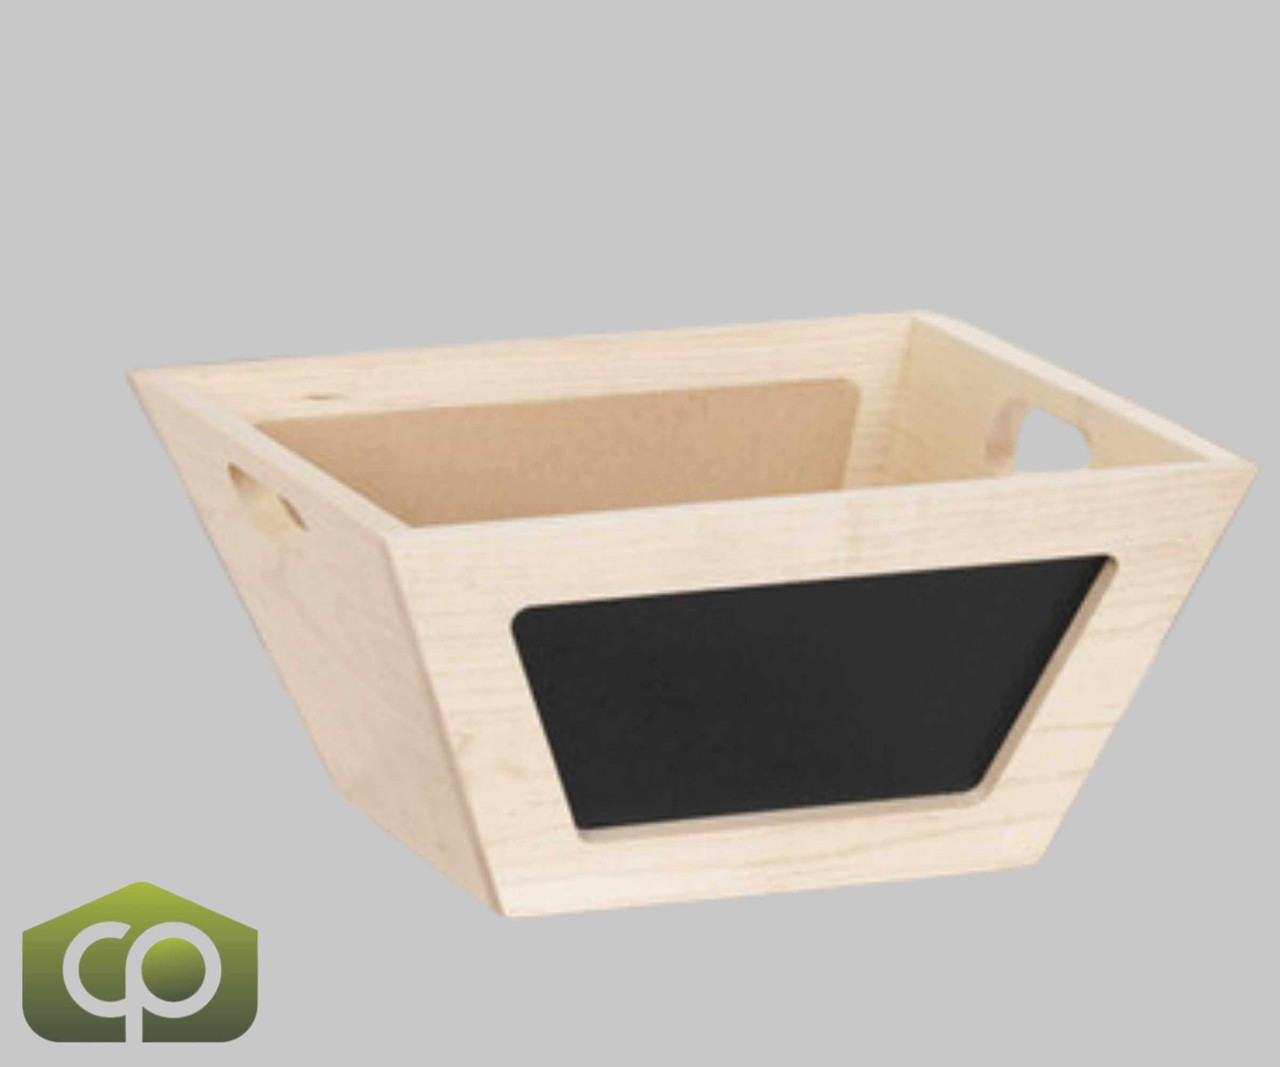 Cal-Mil Blonde 12" x 12" x 6" Maple Wood Box / Display Merchandiser with Chalkboard | Rustic and Functional Display Solution